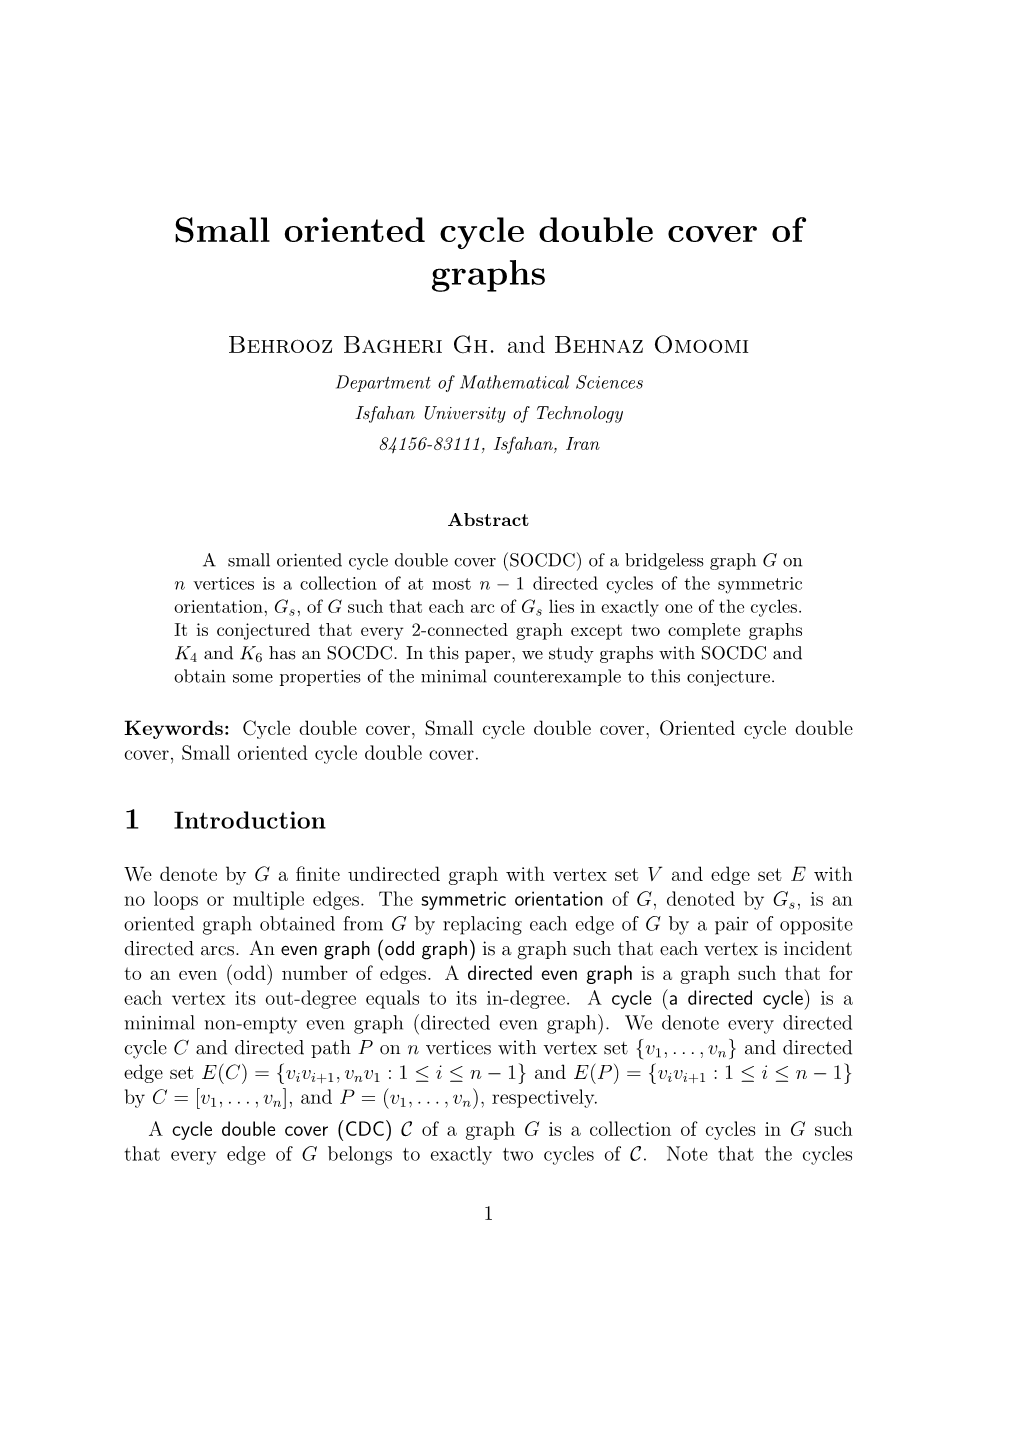 Small Oriented Cycle Double Cover of Graphs